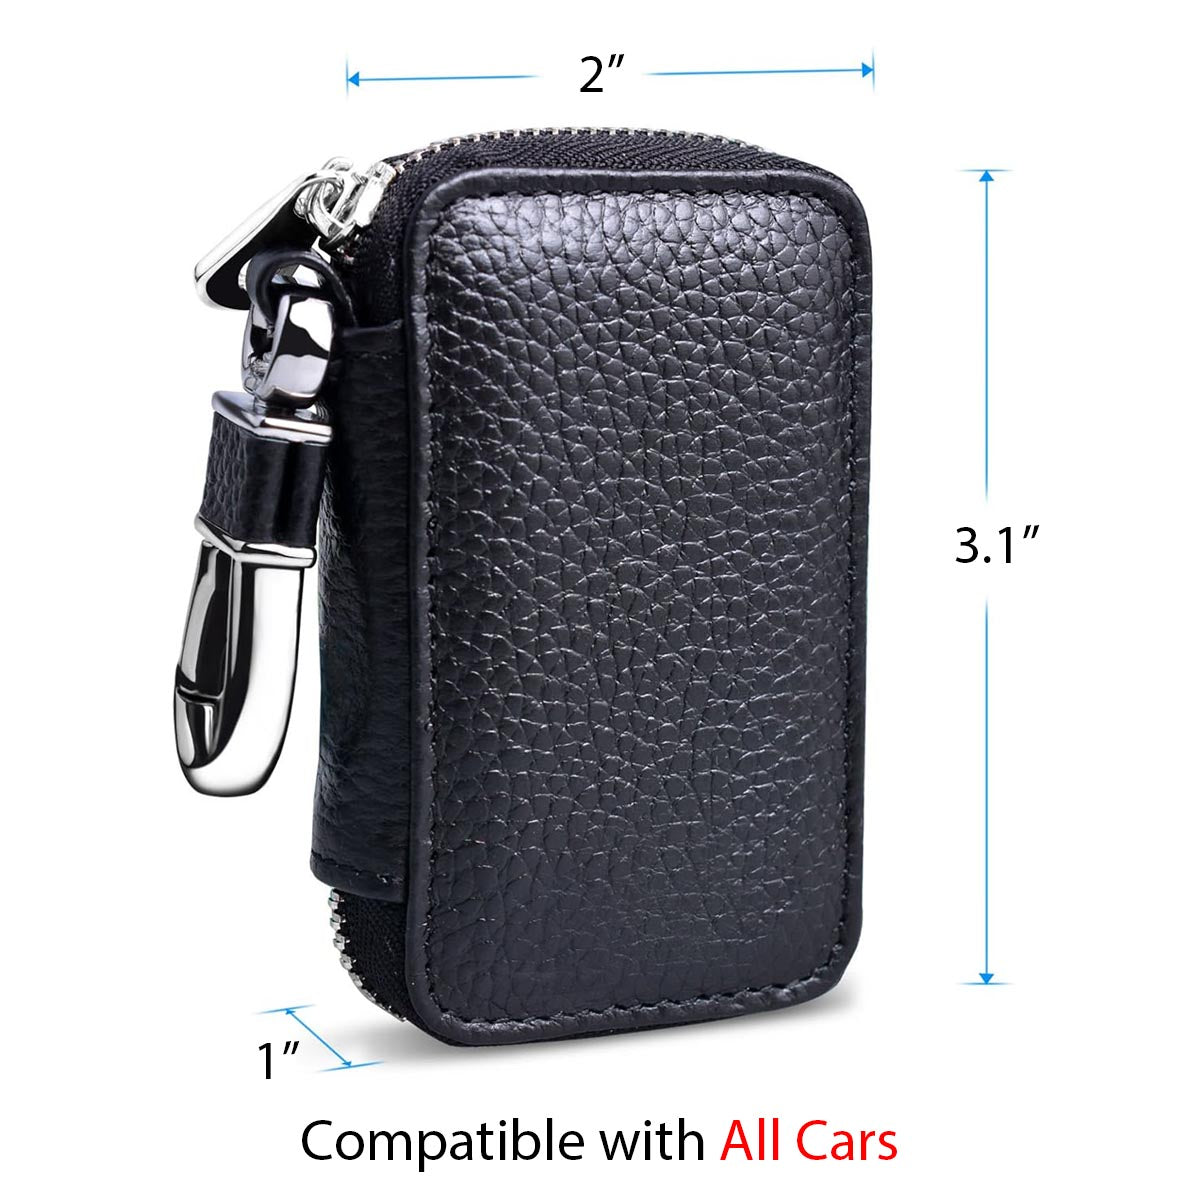 Car Key Cover, Custom For Your Cars, Genuine Leather Car Smart Key Chain Coin Holder Metal Hook and Keyring Wallet Zipper Bag, Car Accessories WQ13989